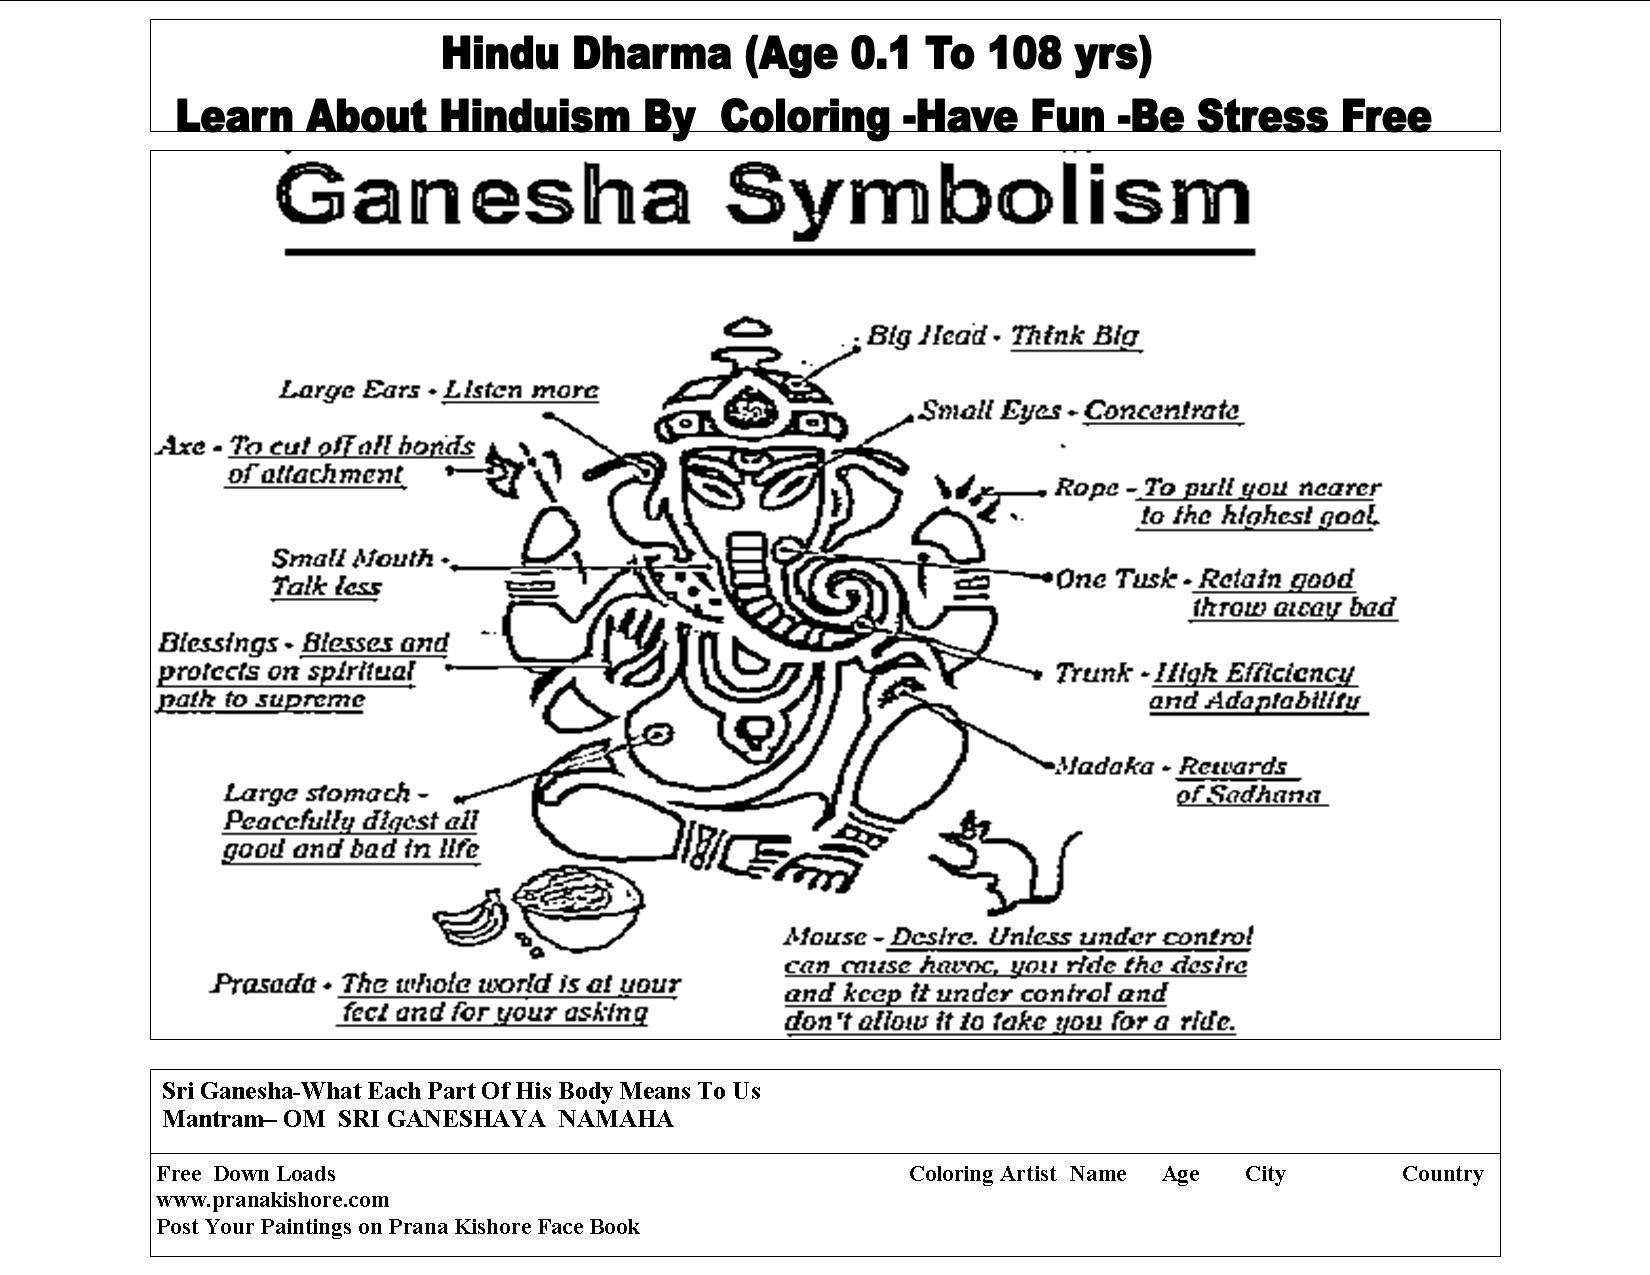 Hindu Dharma Coloring-Sri Ganesha what each part of his body means to us